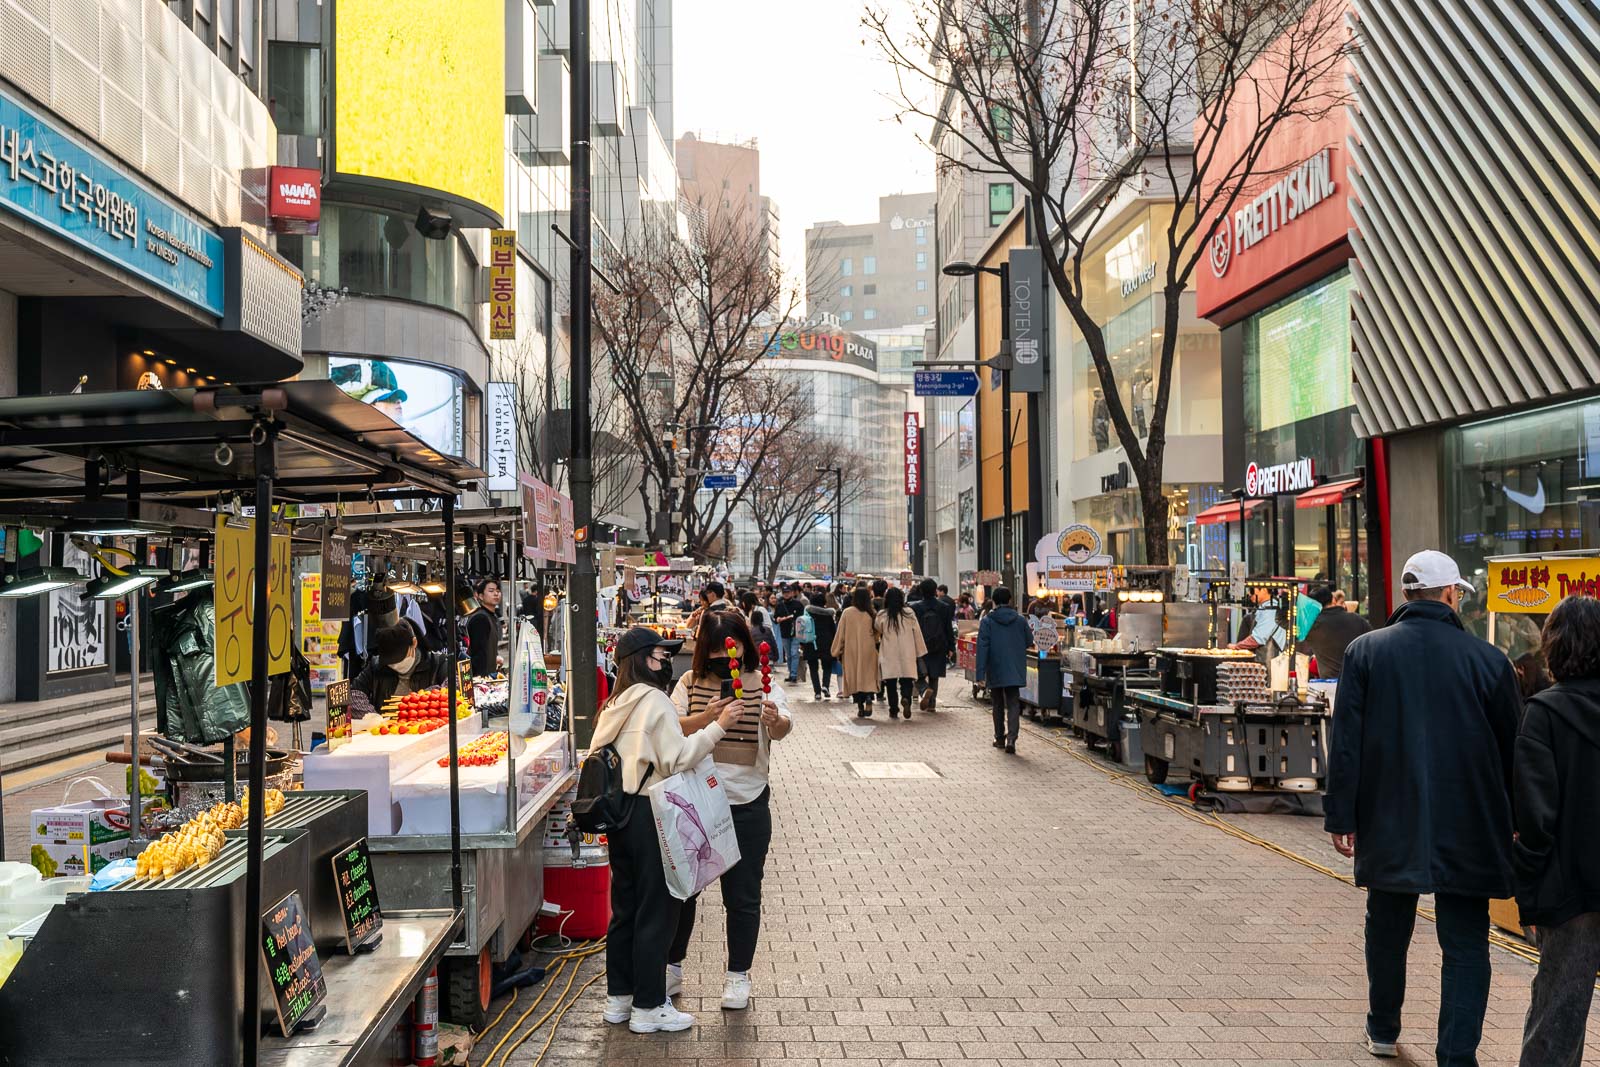 Where to stay in Seoul: Myeongdong